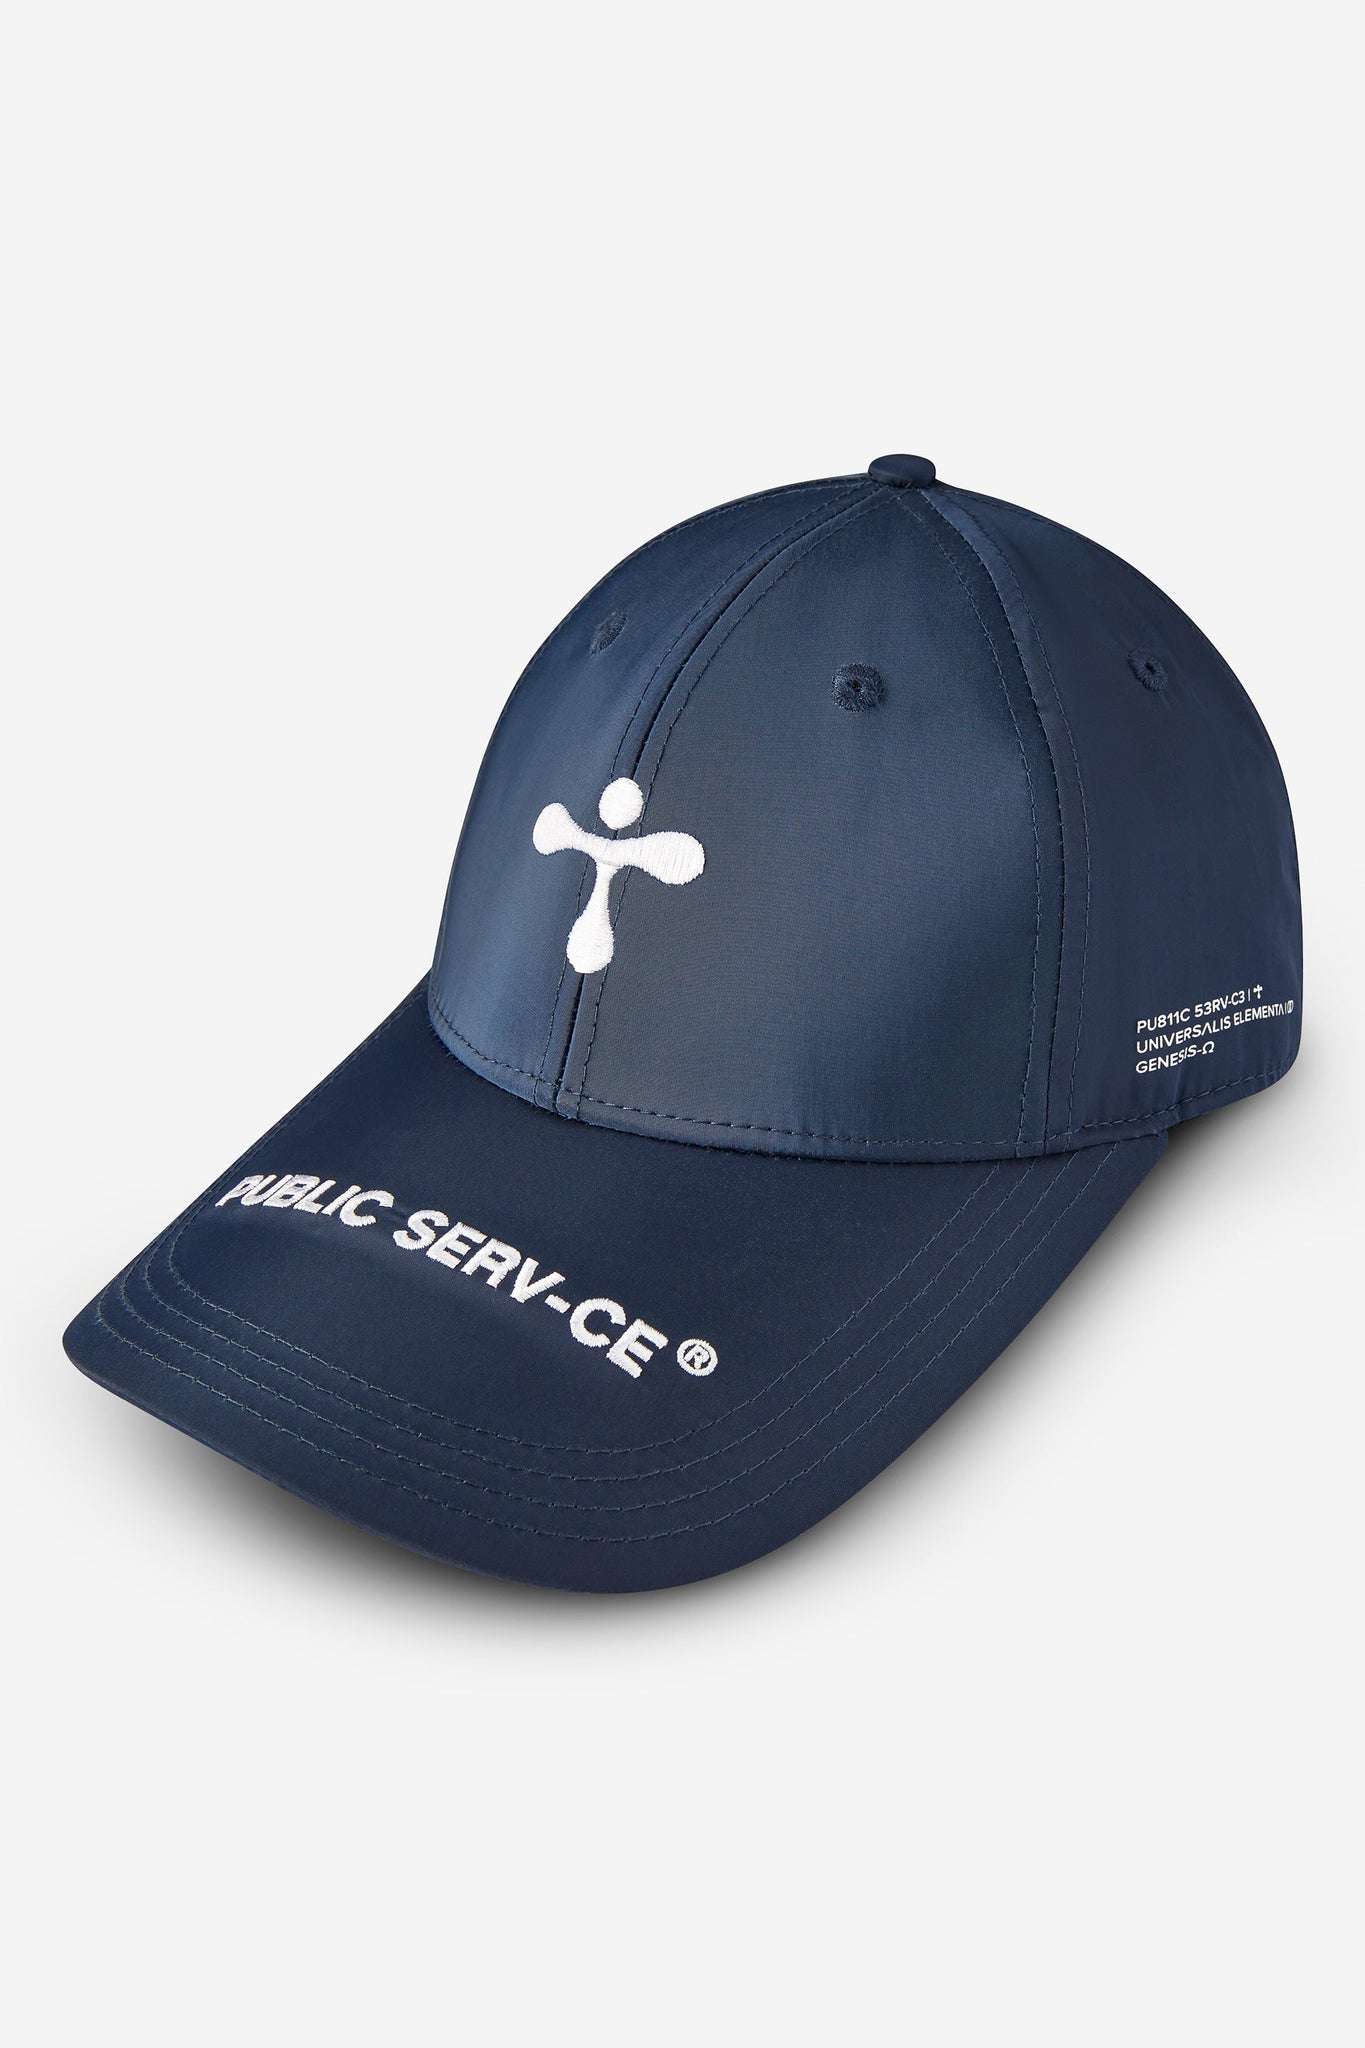 alt="3/4 close up of blue cap with 3D stitching, elongated visor and contrast prints"